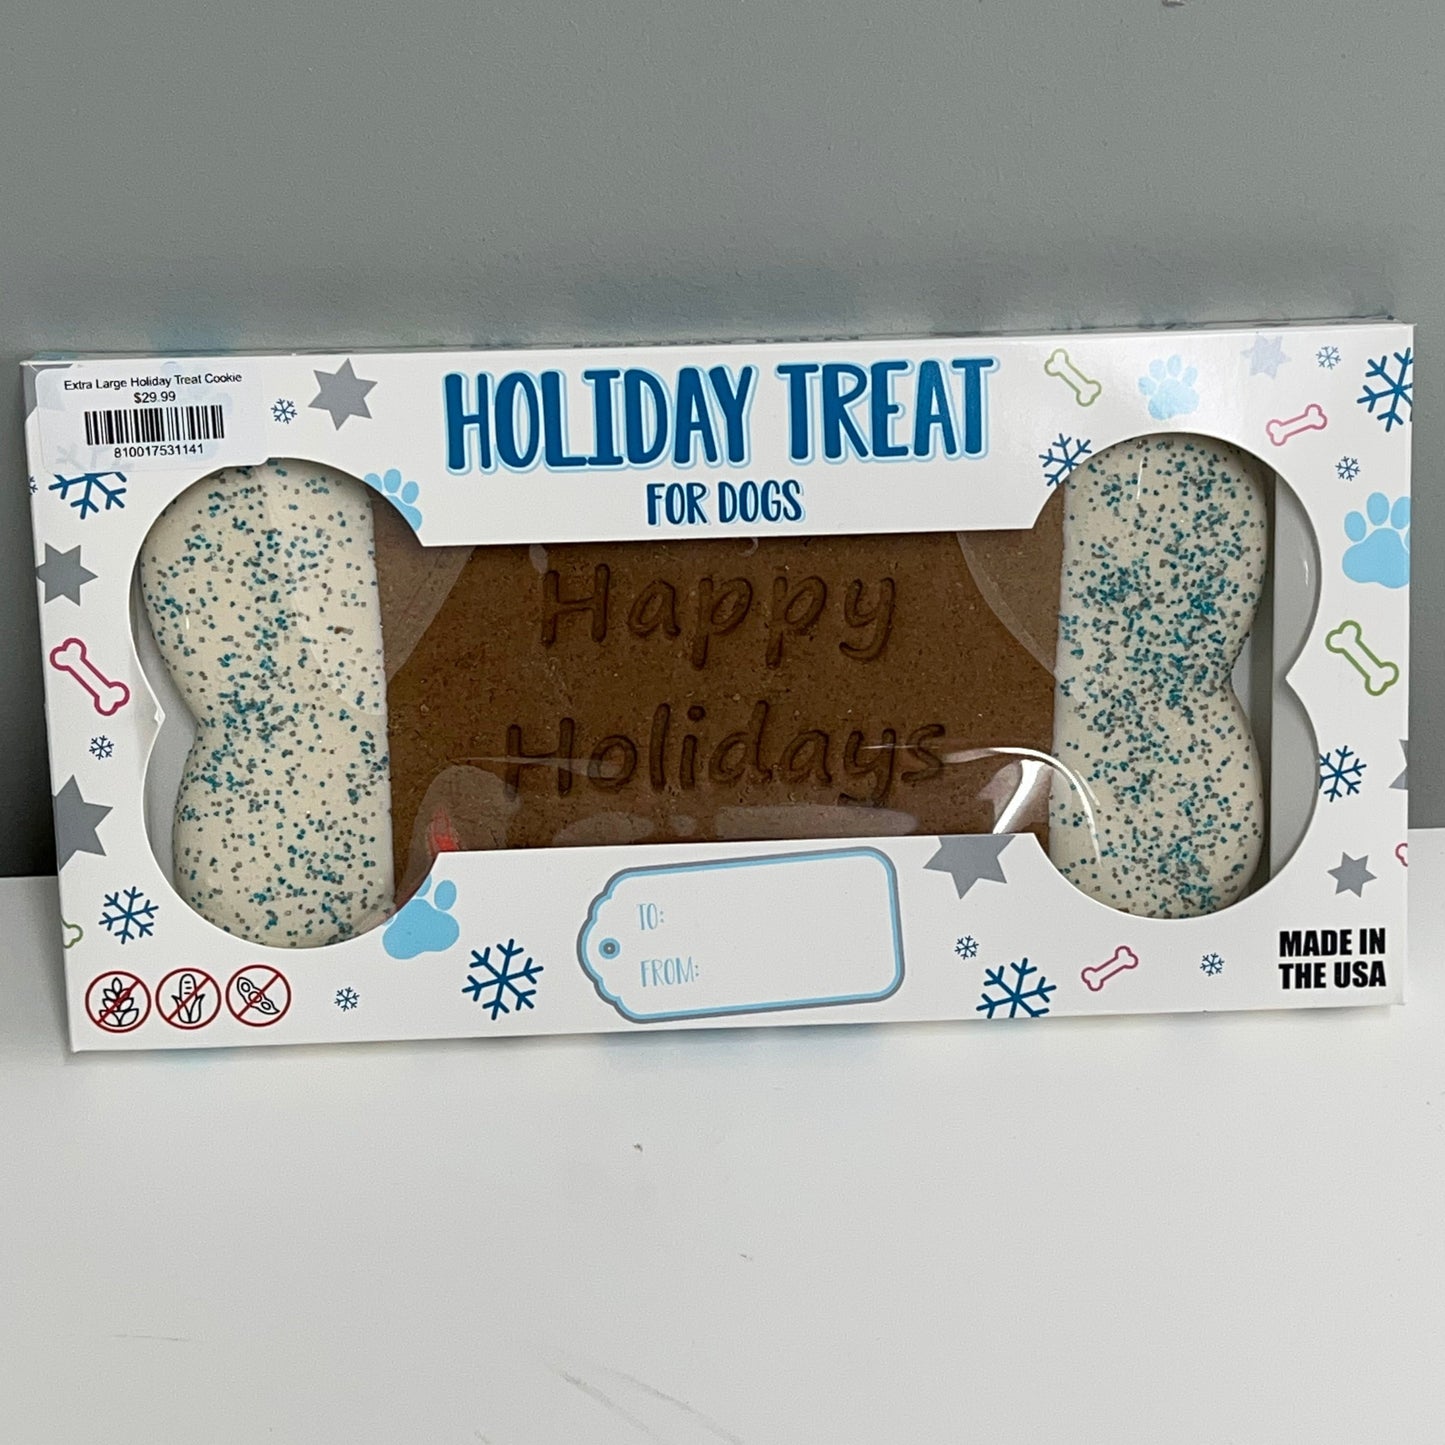 Extra Large Holiday Treat Cookie